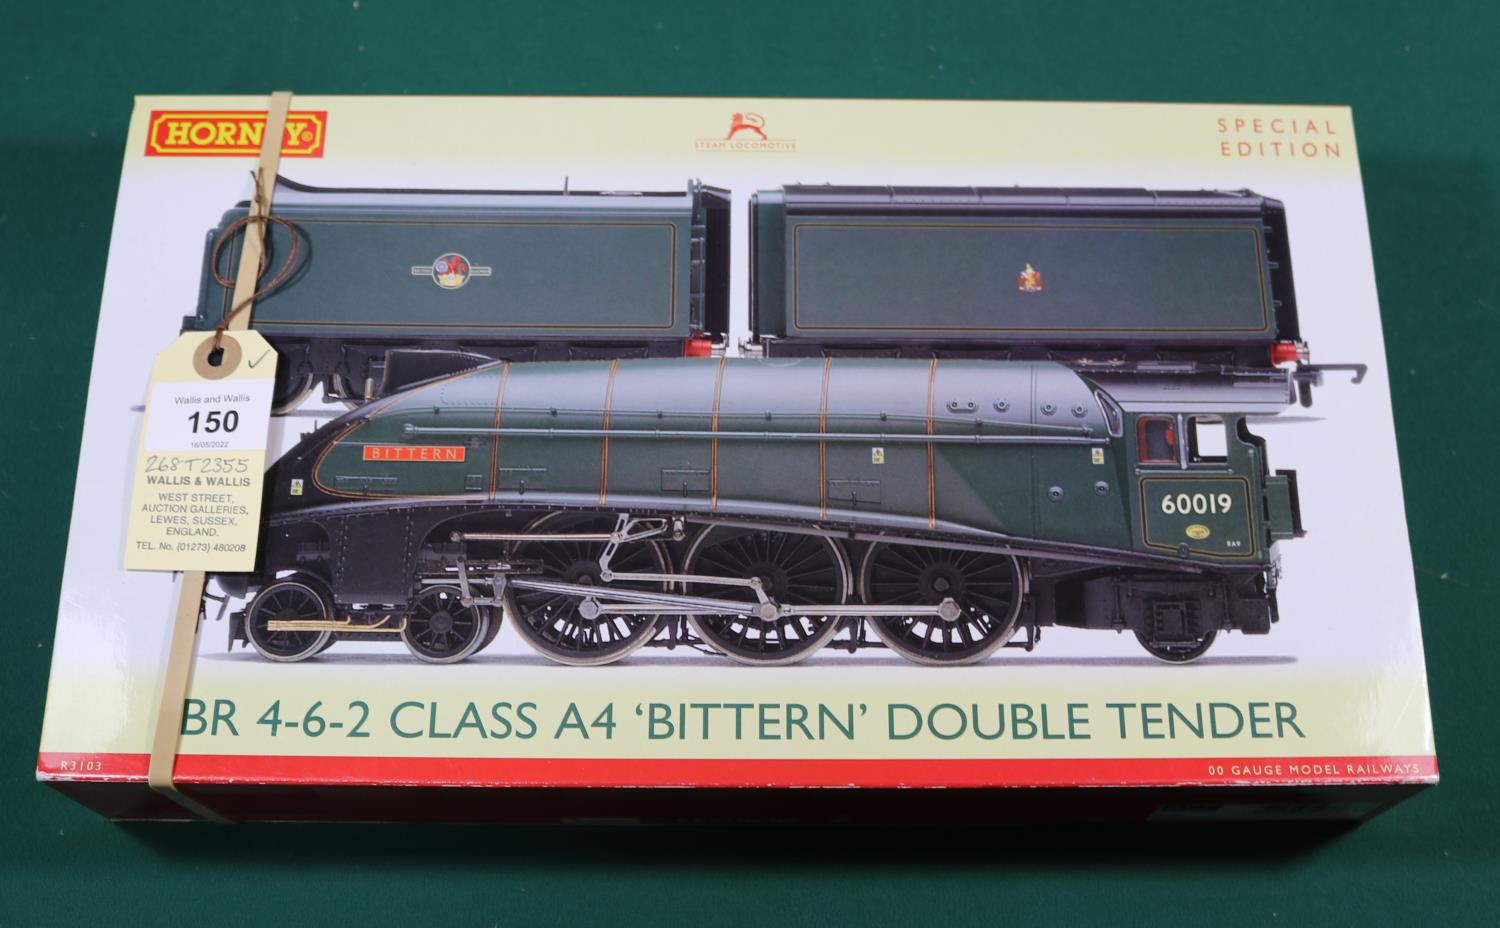 A Hornby OO BR Class A4 4-6-2 locomotive with double tender (R3103). Bittern 60019, in lined